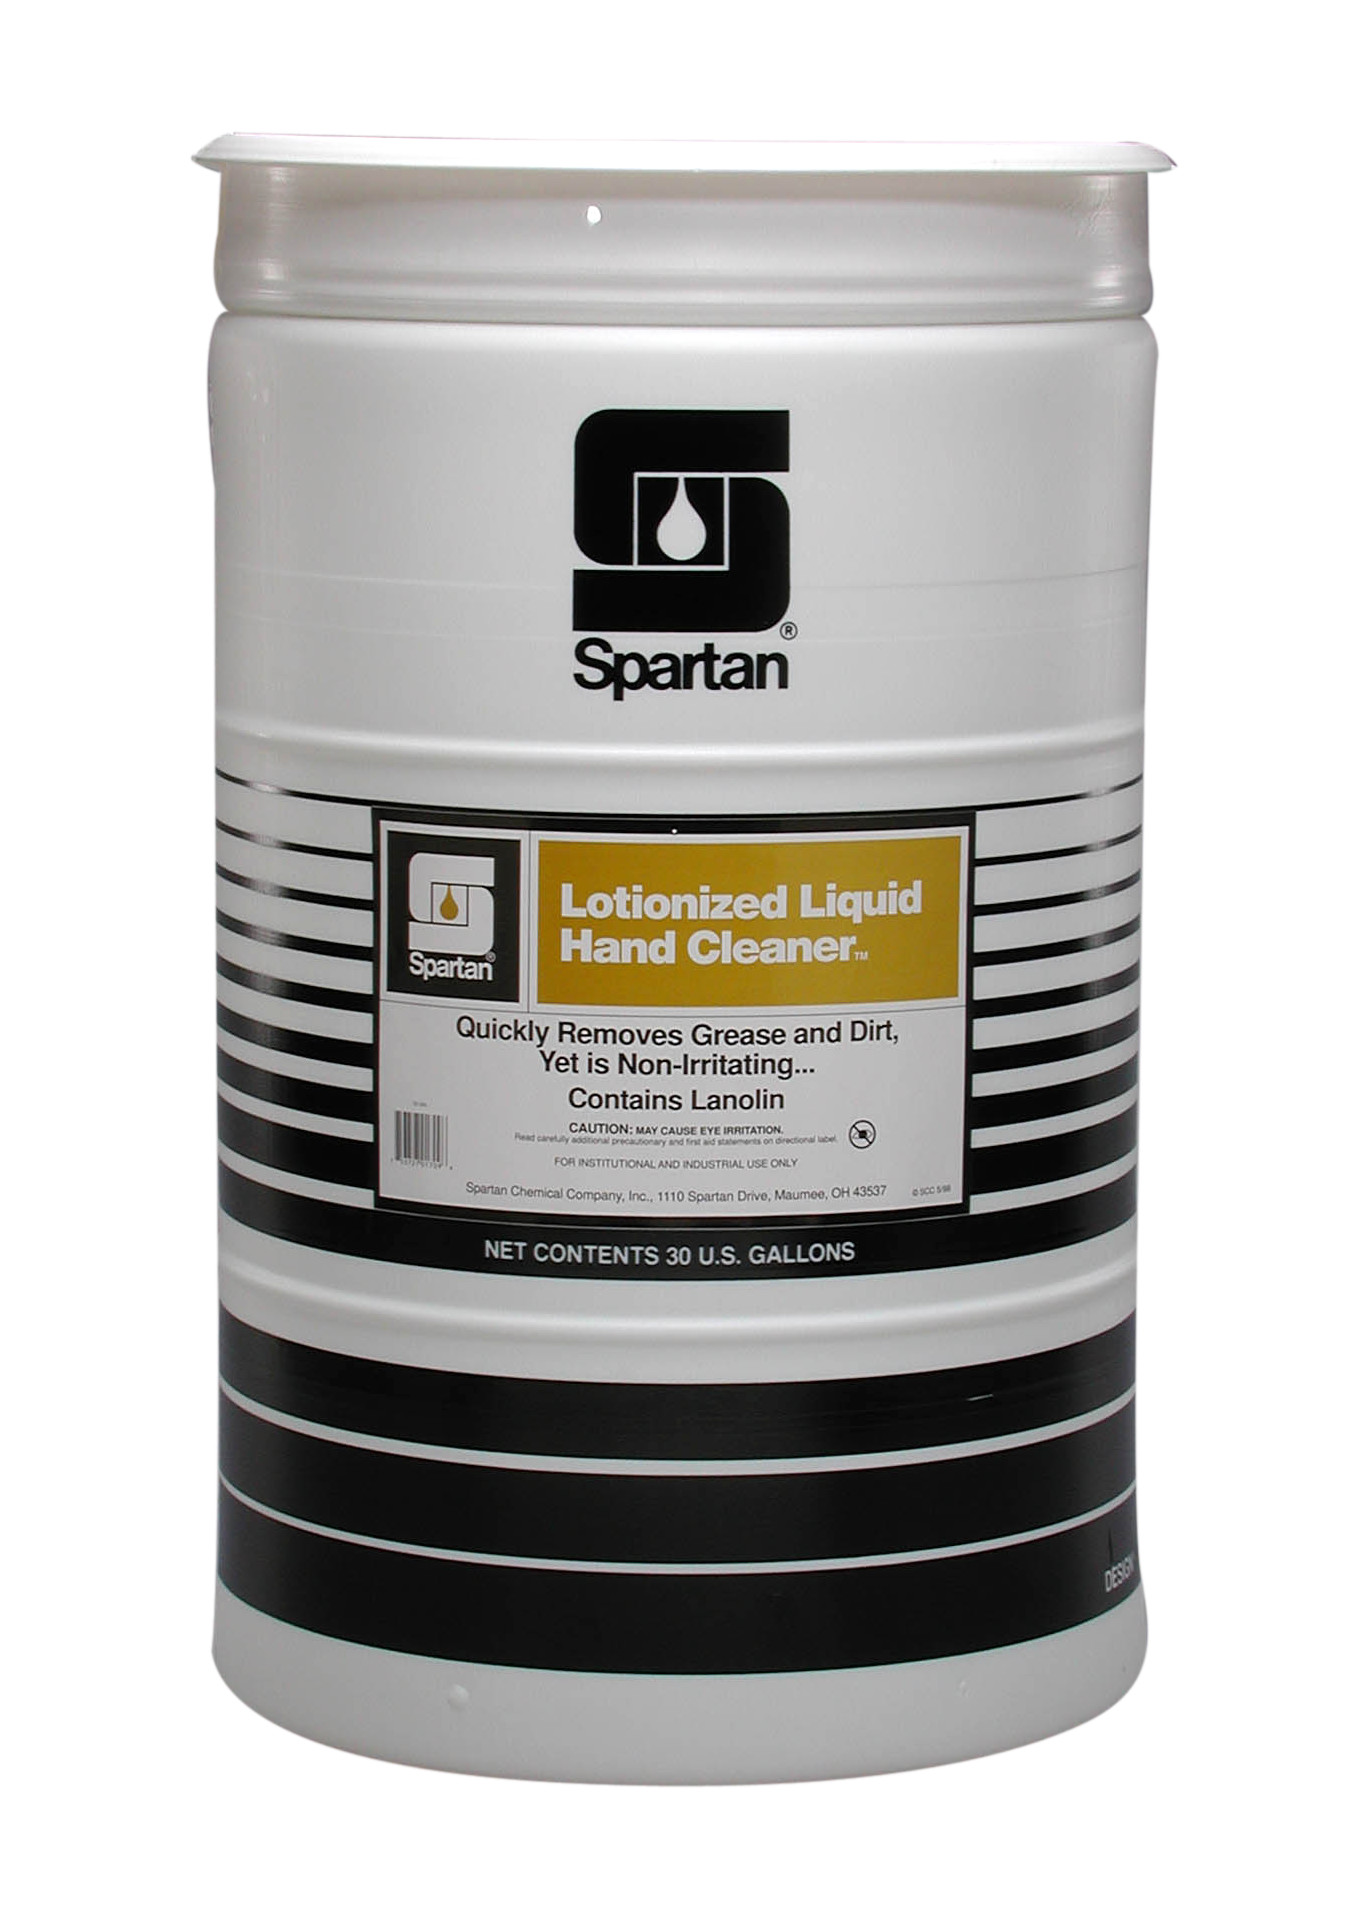 Spartan Chemical Company Lotionized Liquid Hand Cleaner, 30 GAL DRUM